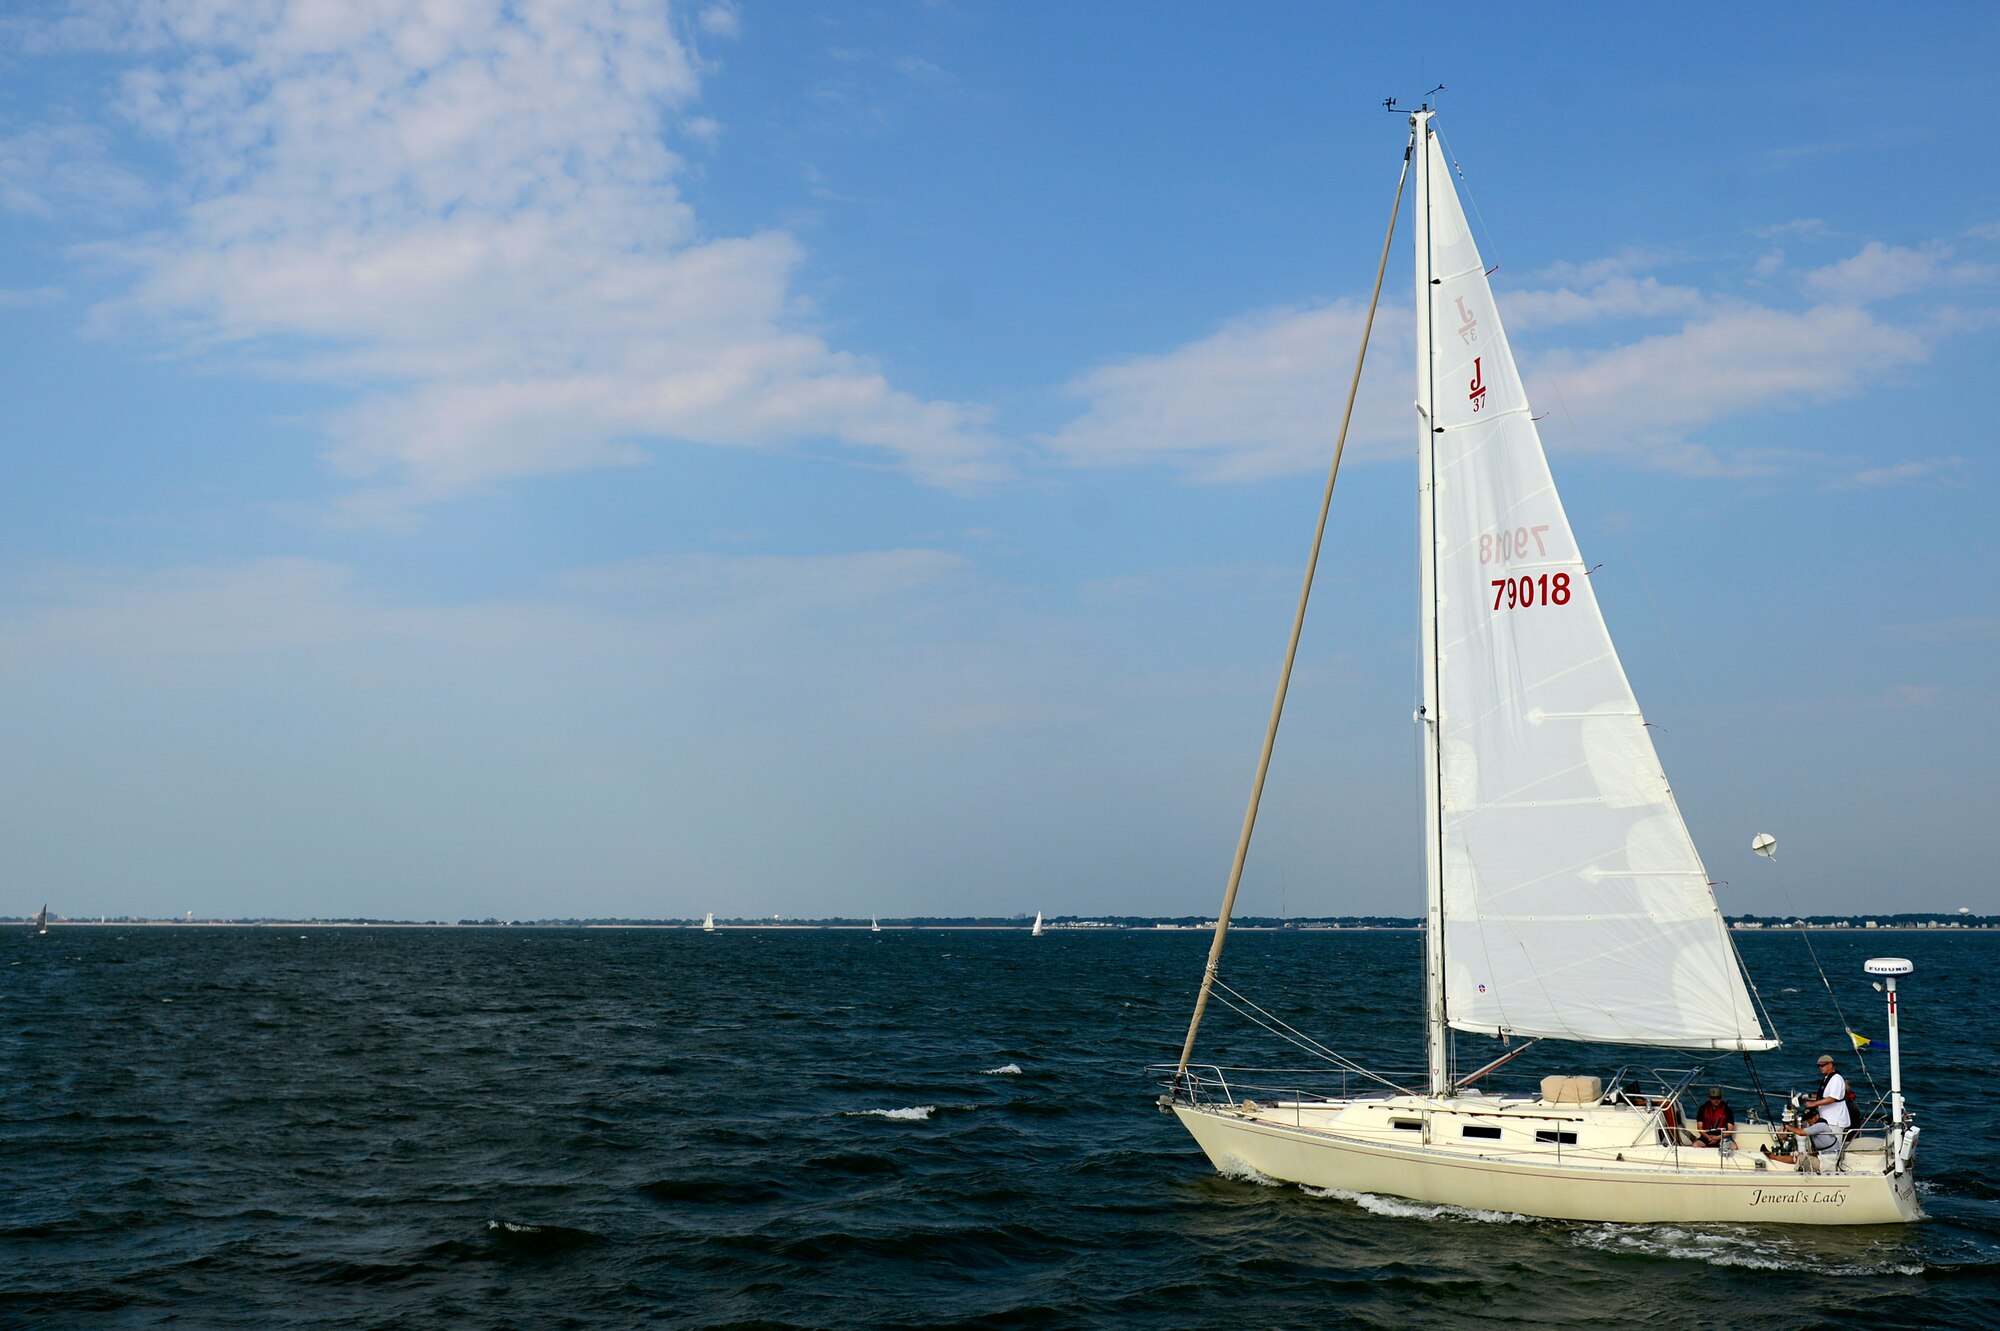 A crew prepares their sailboat to race in the Tri-Services Regatta on Chesapeake Bay, Va., Sept. 11, 2016. More than 50 boats belonging to U.S. Air Force, U.S. Army, U.S. Navy and military affiliated yacht clubs participated in the race. (U.S. Air Force photo by Airman 1st Class Kaylee Dubois)